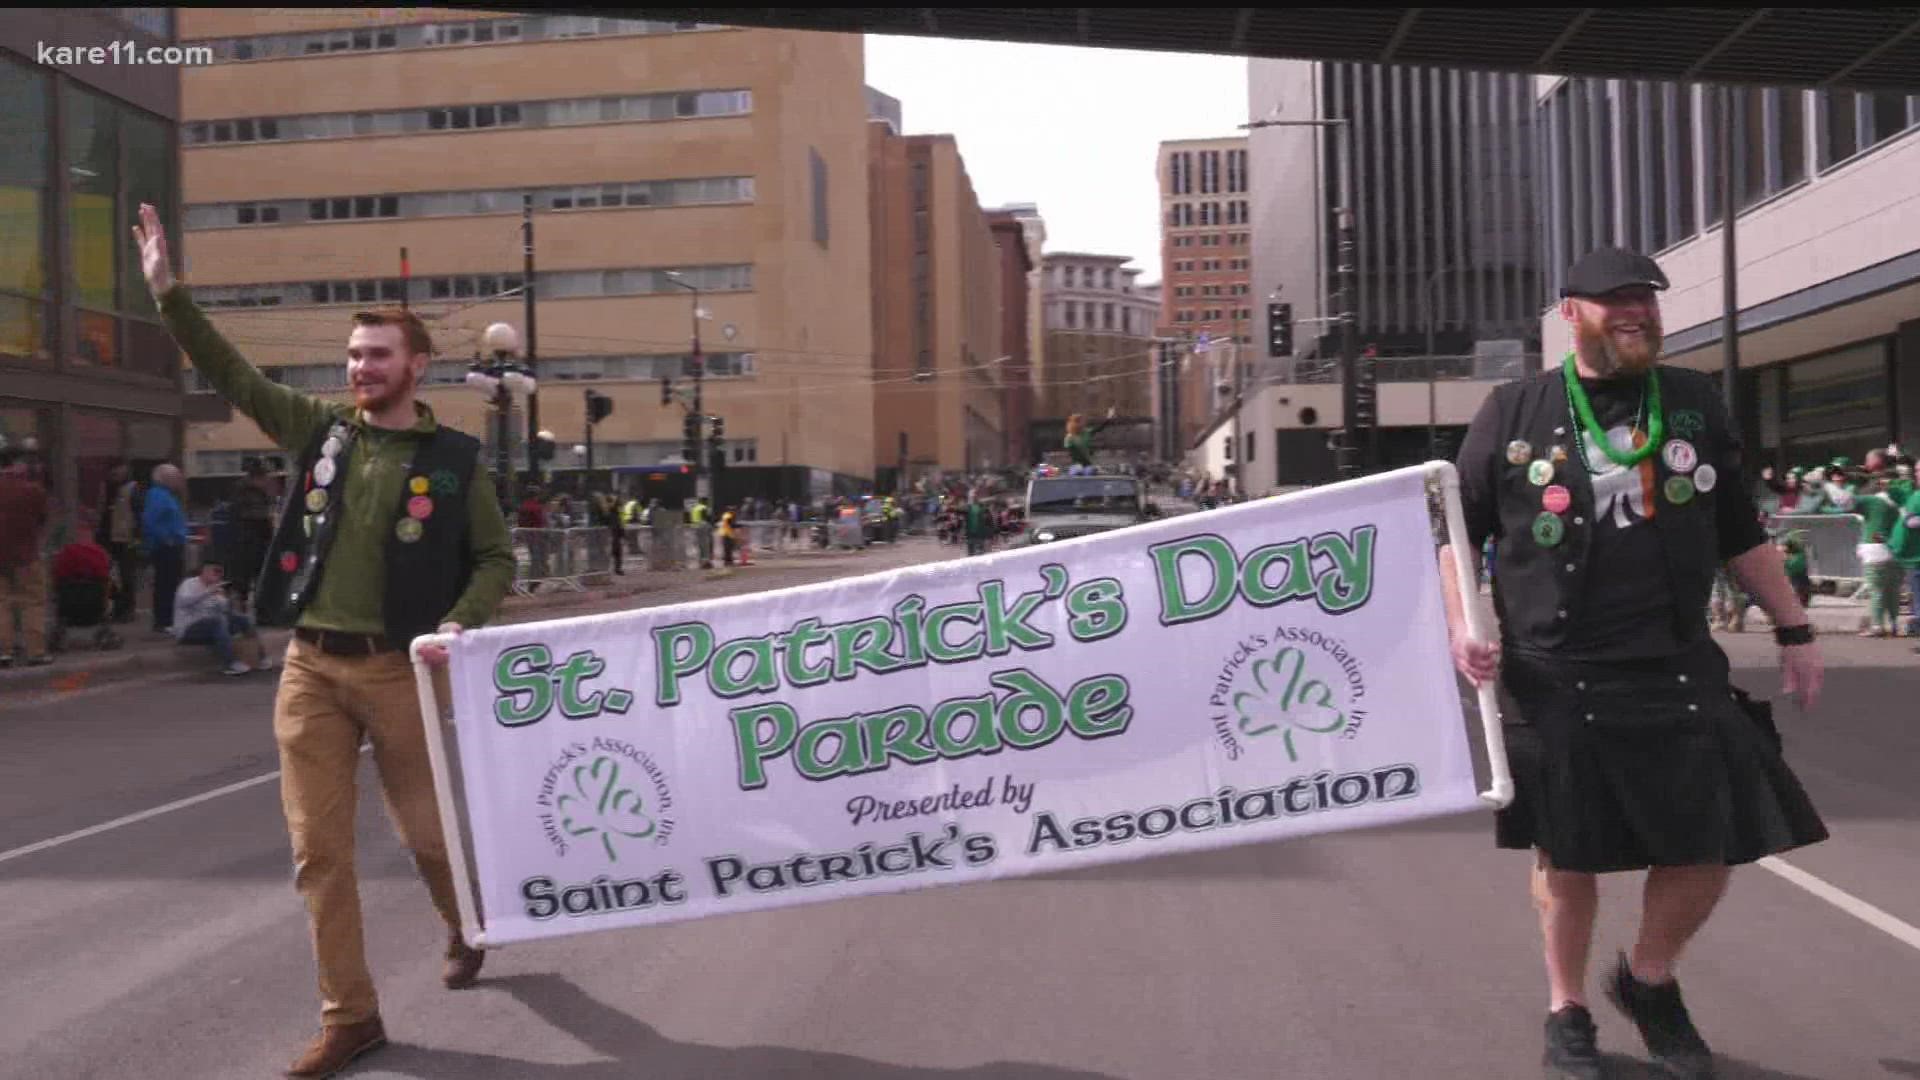 Buffalo Sabres - Check out our green St. Patrick's Day